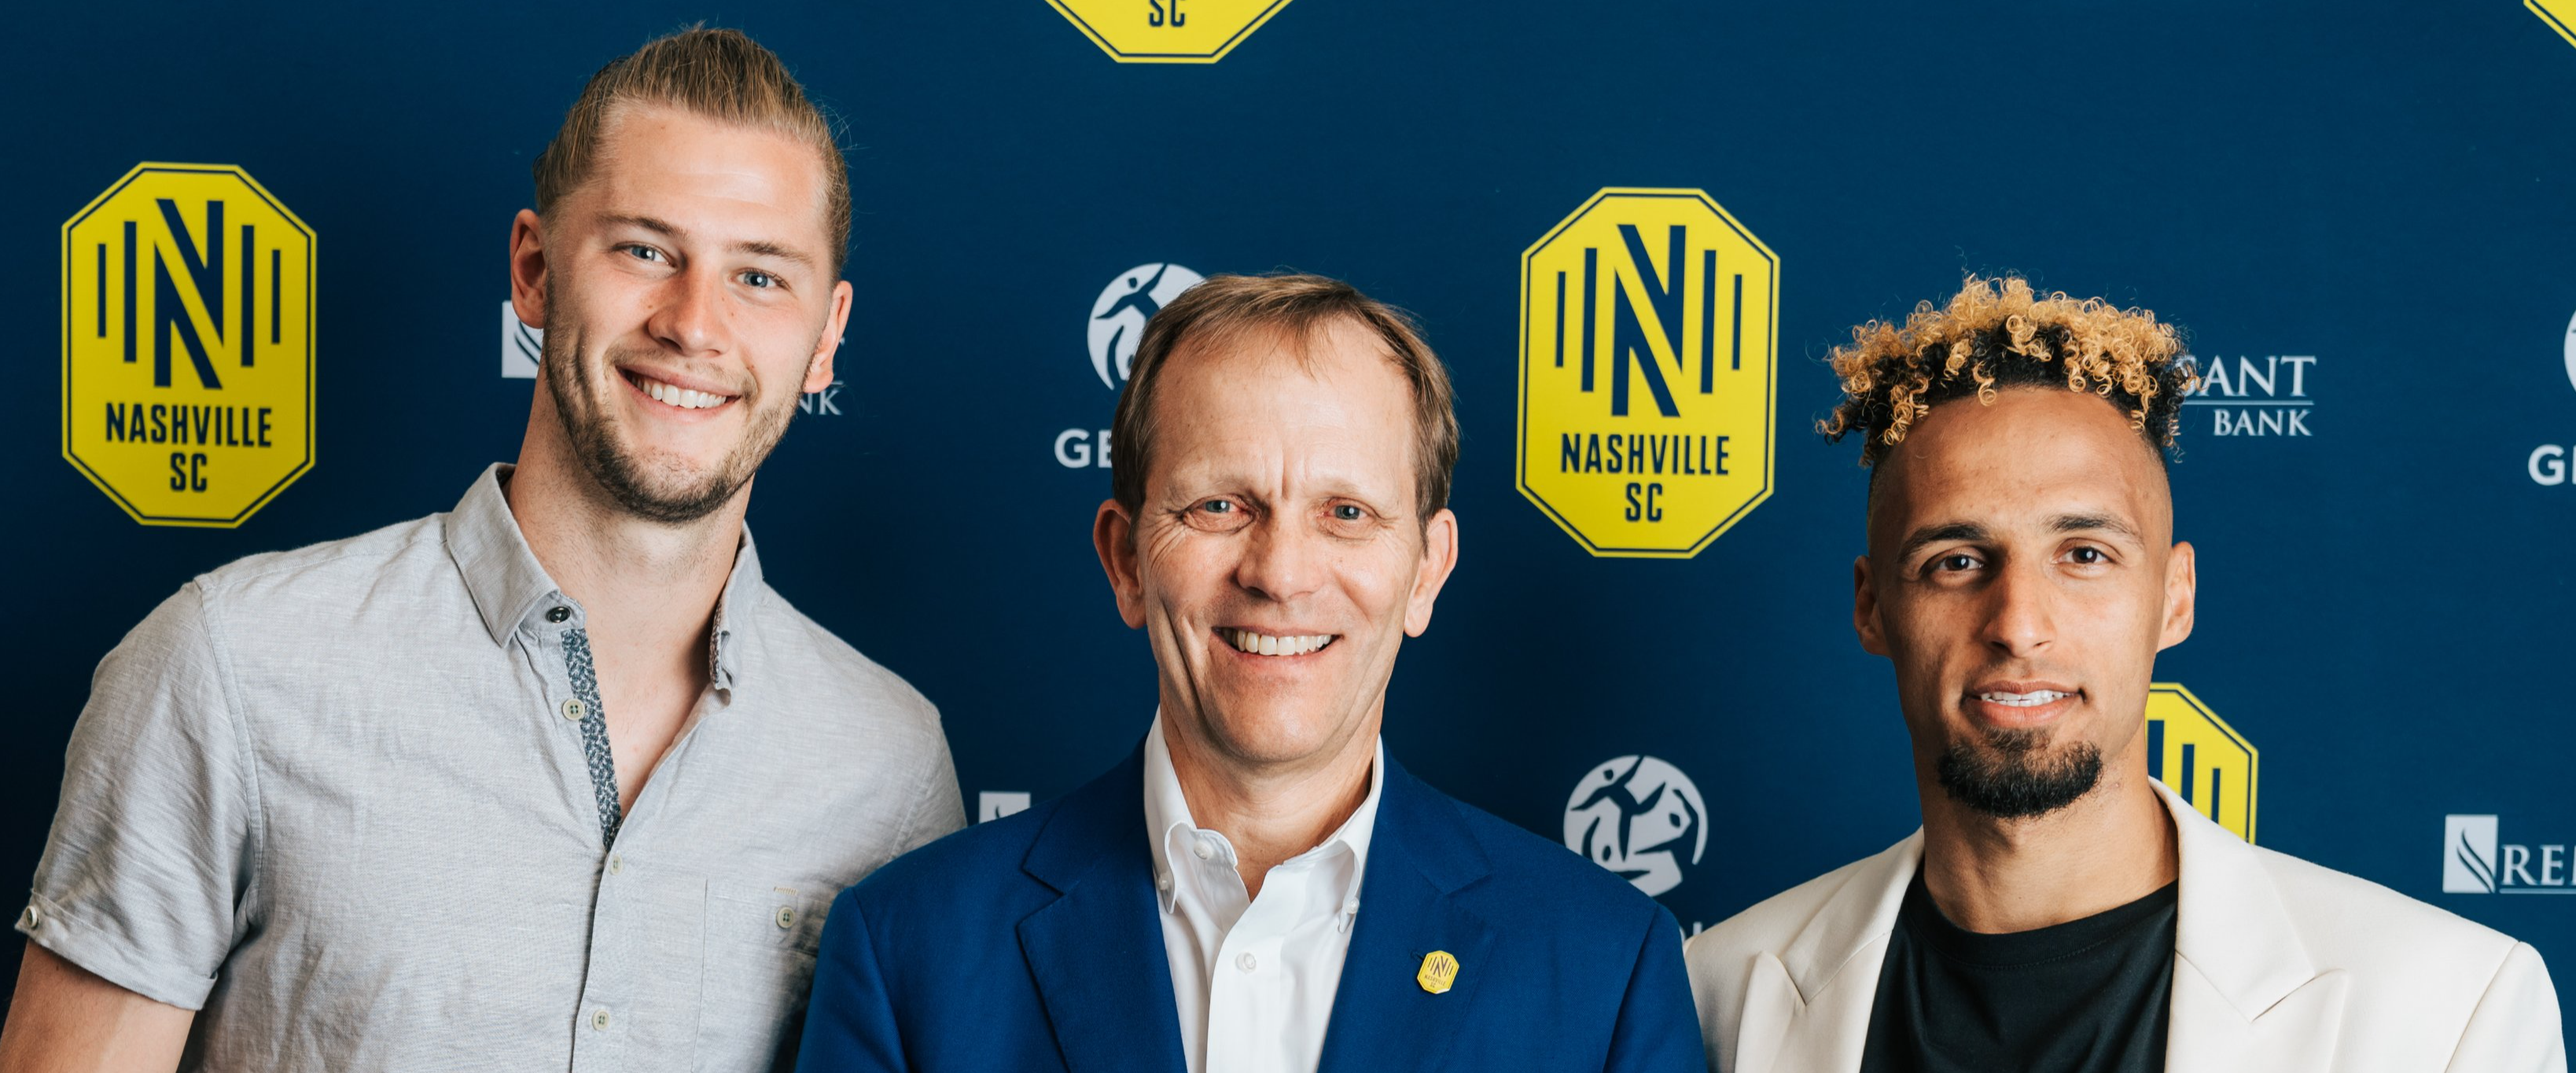 Thank goodness! Nashville SC signs Walker Zimmerman and Hany Mukhtar to extensions!